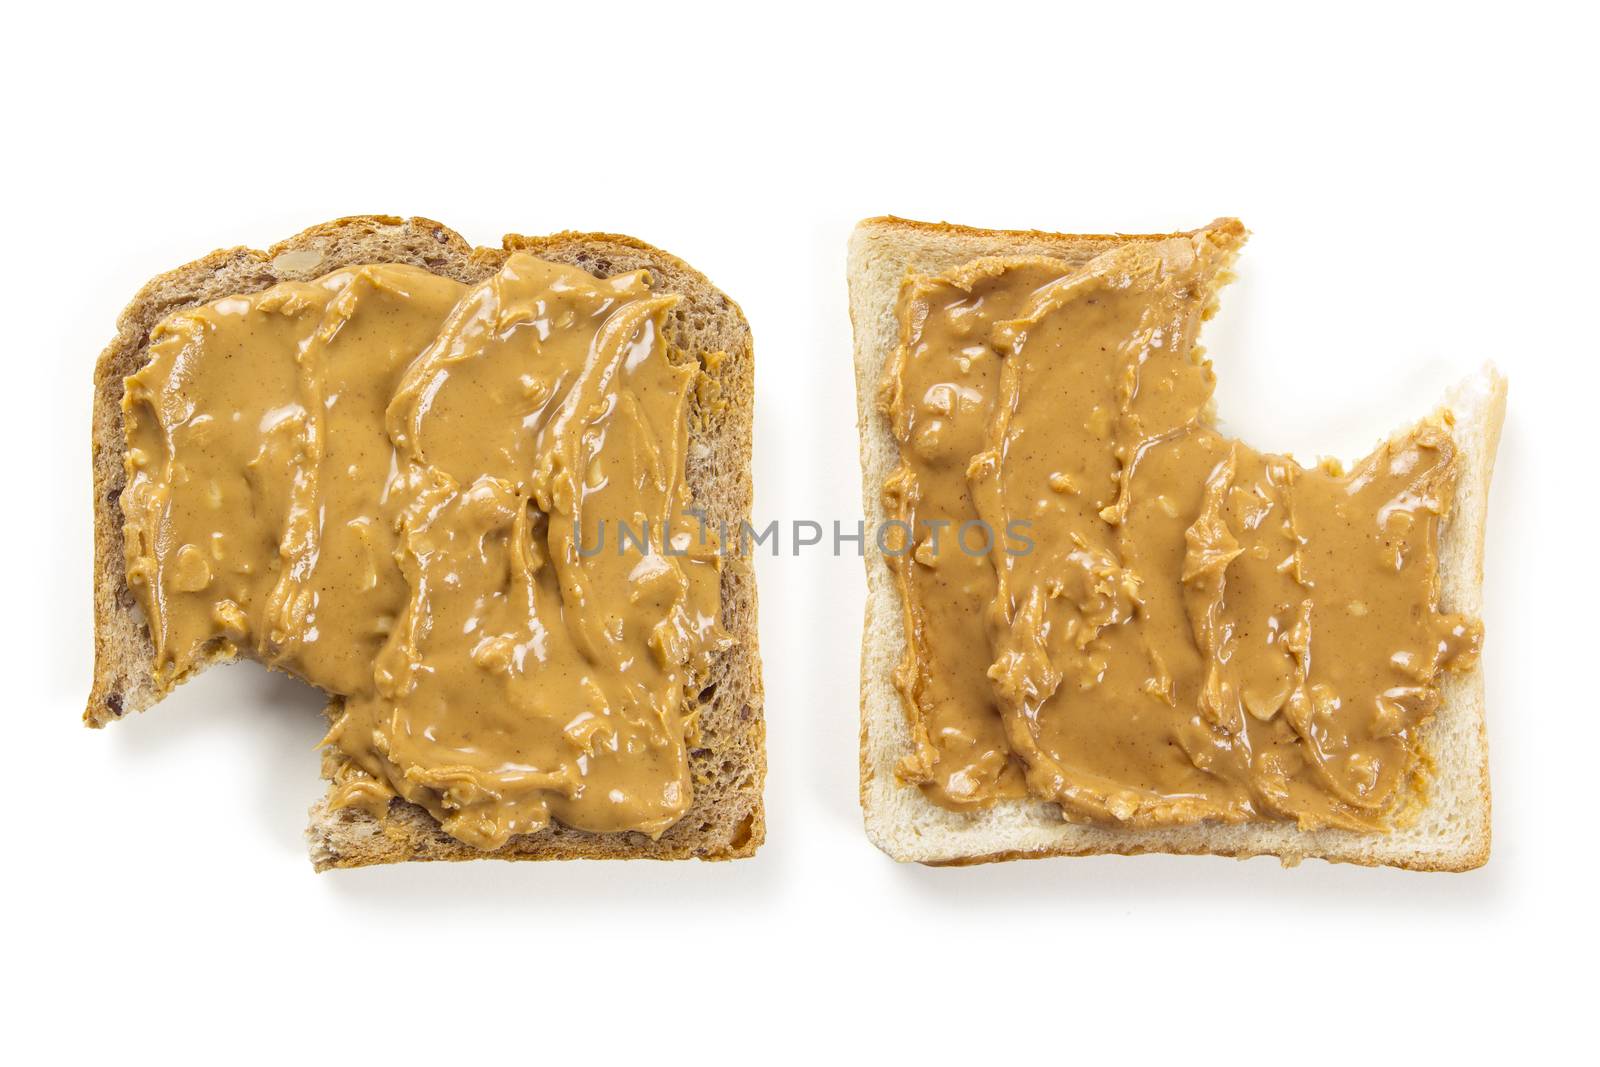 Photo of two slices of white and whole wheat bread covered in peanut butter, isolated on white, with bites.